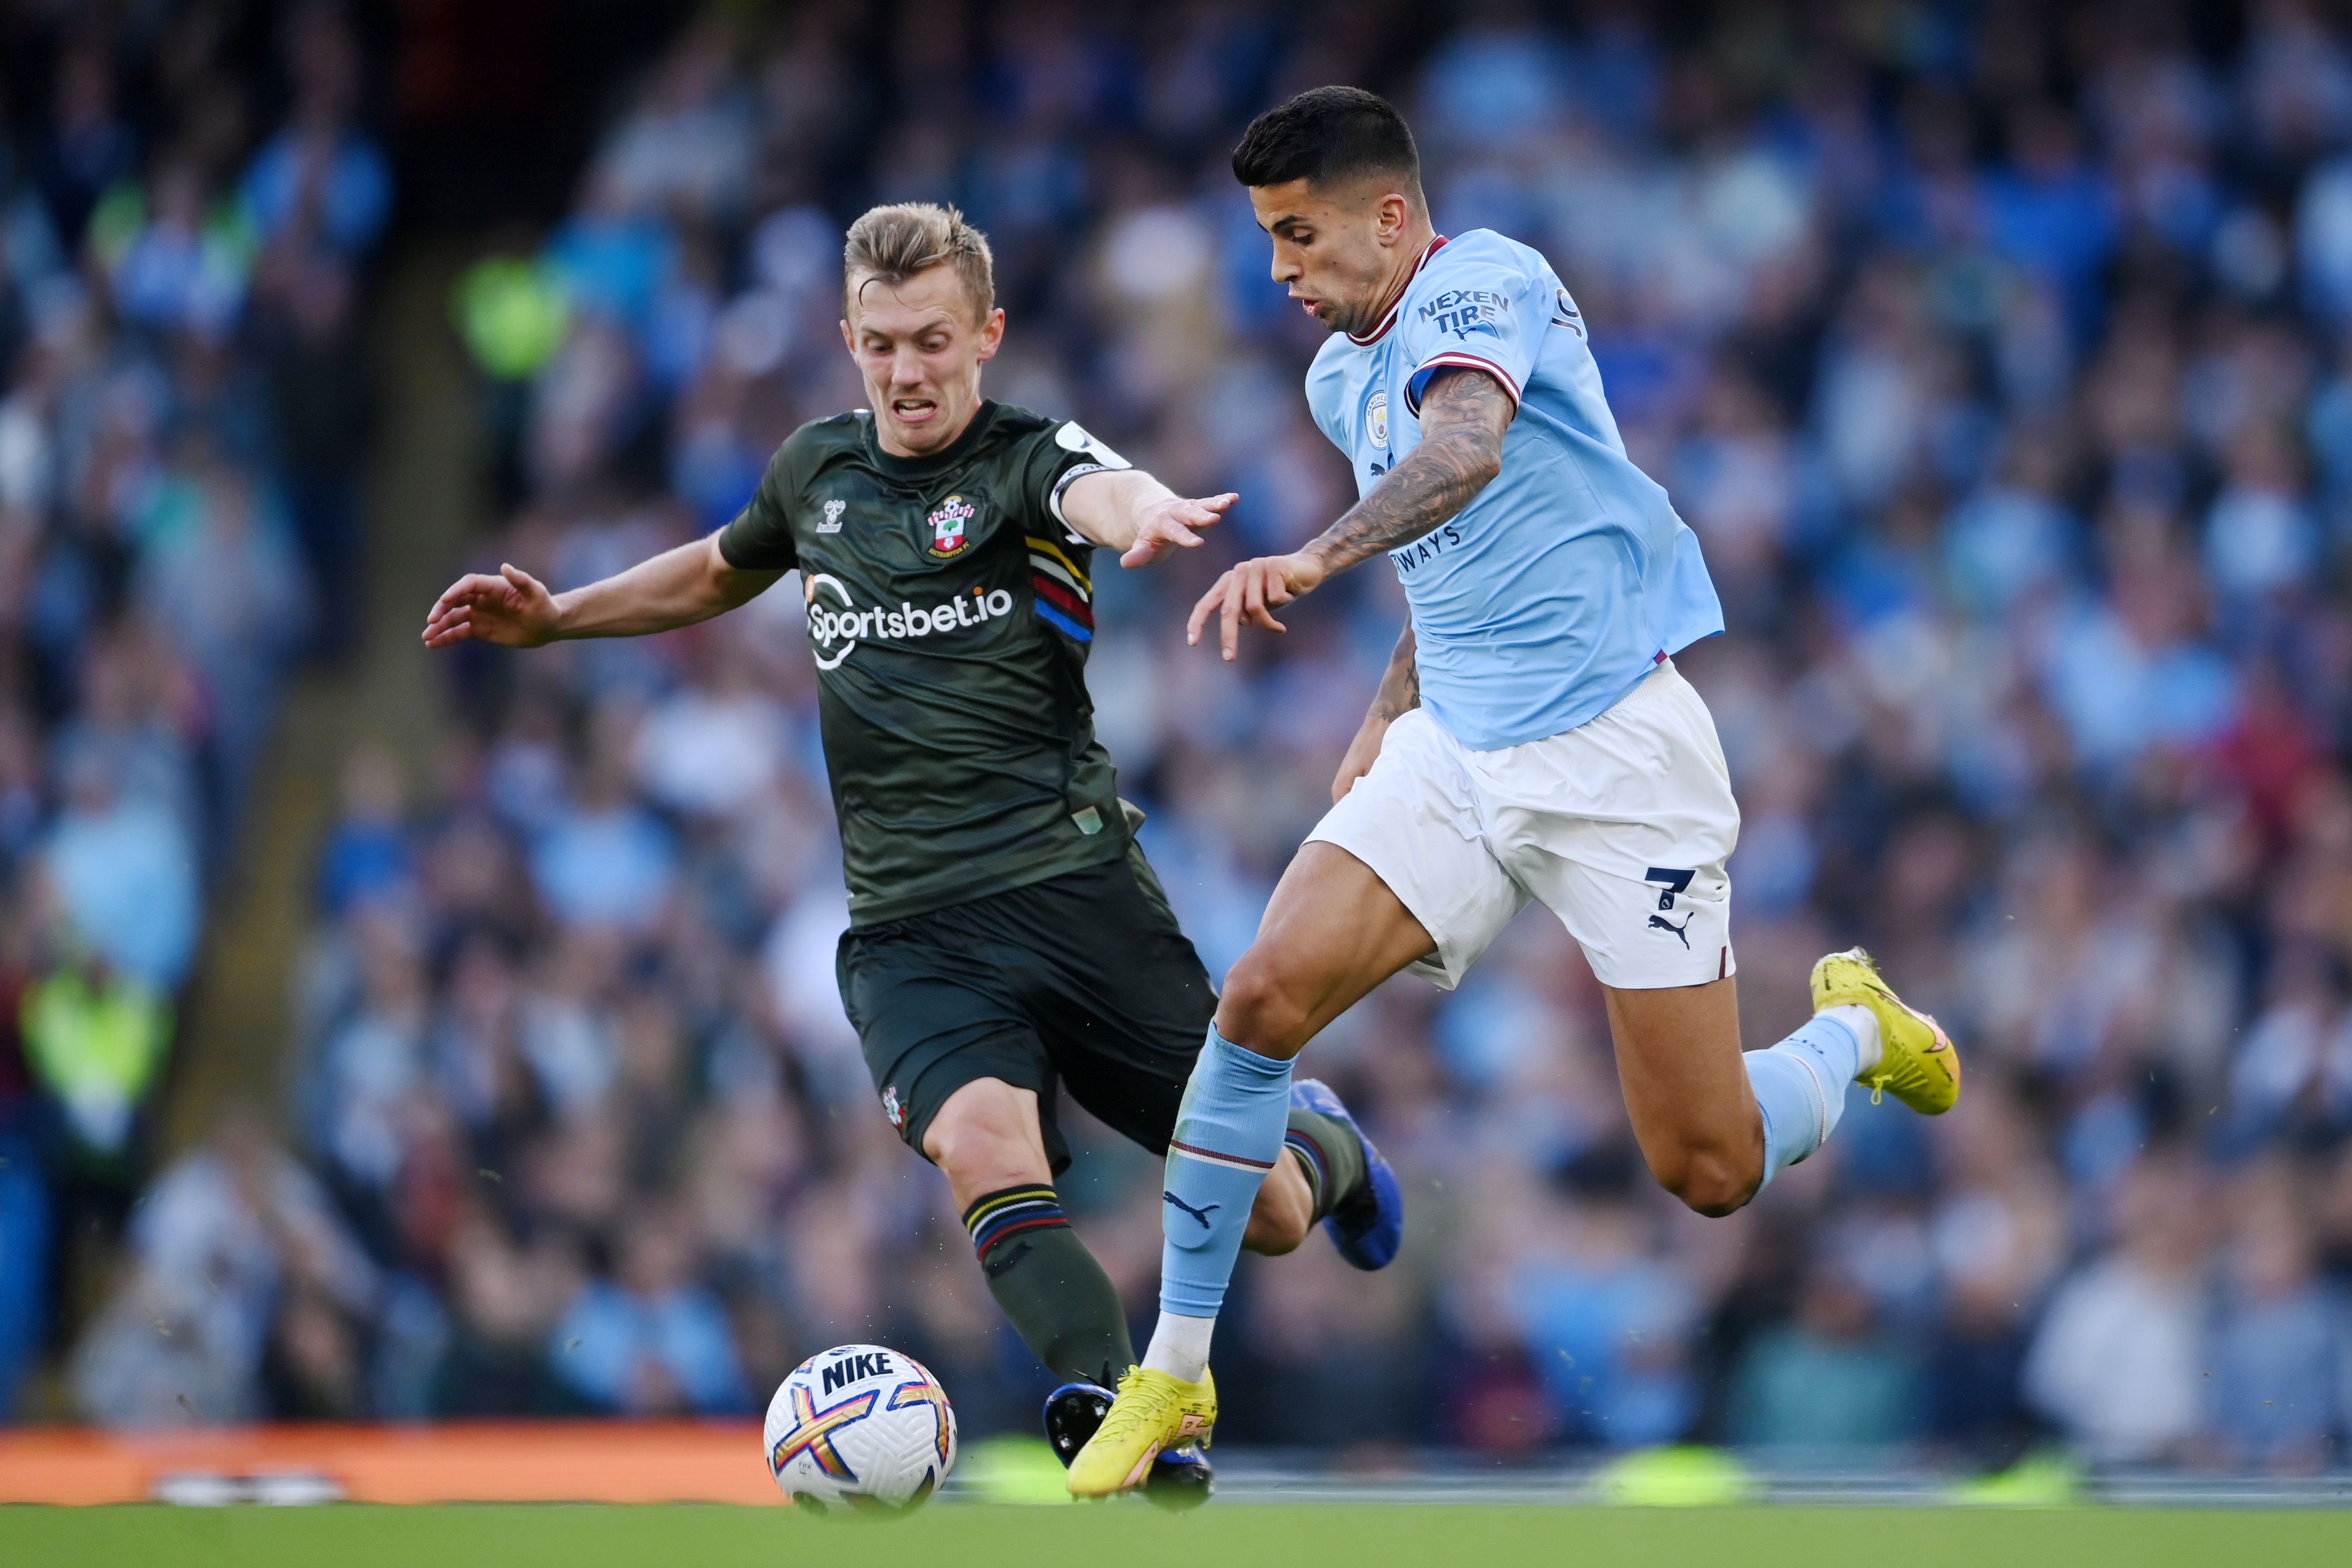 Joao Cancelo challenged by James Ward-Prowse